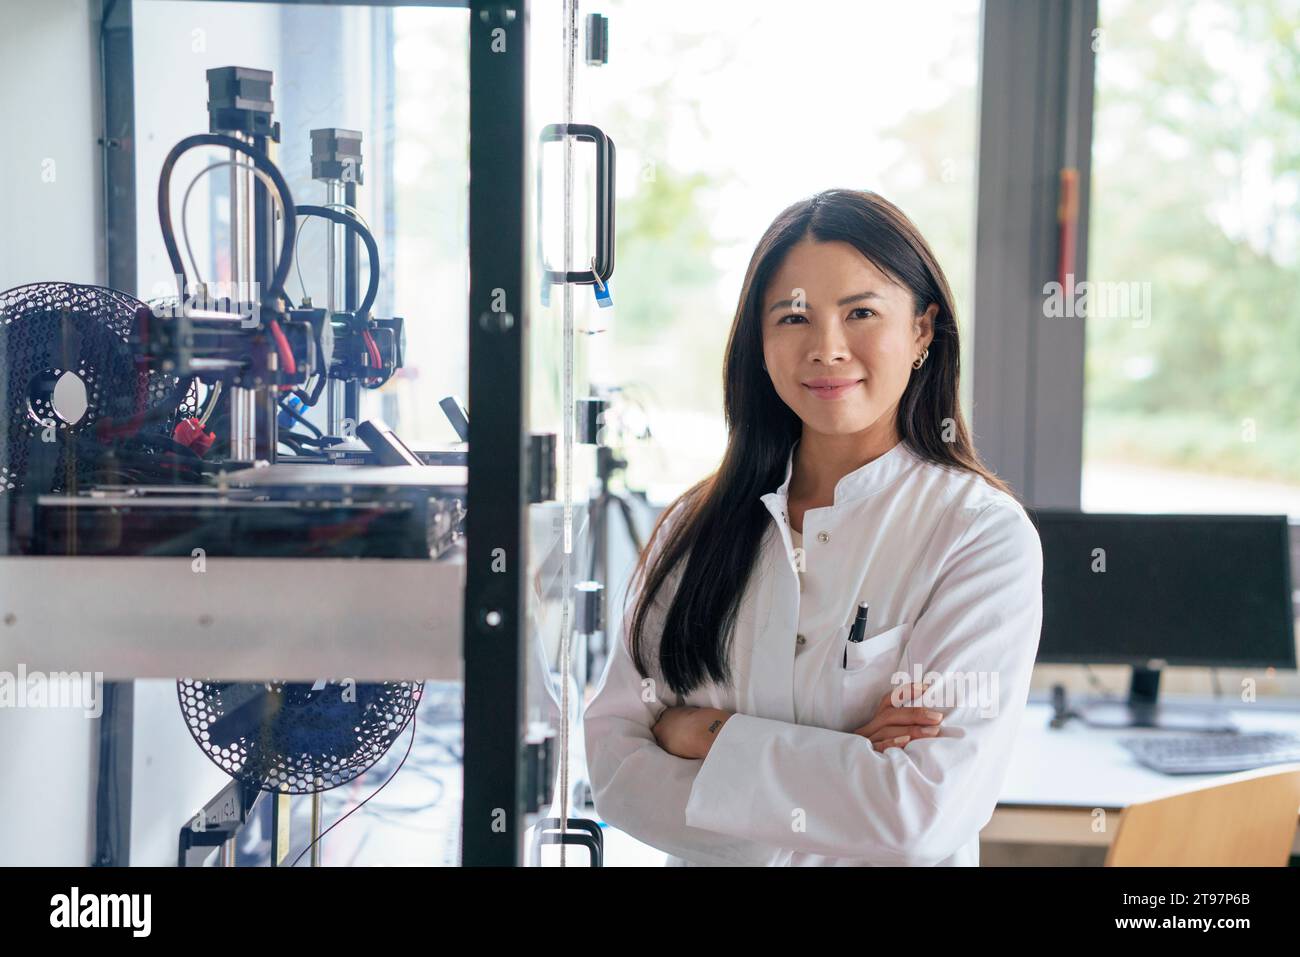 Smiling scientist standing with arms crossed near machine in laboratory Stock Photo